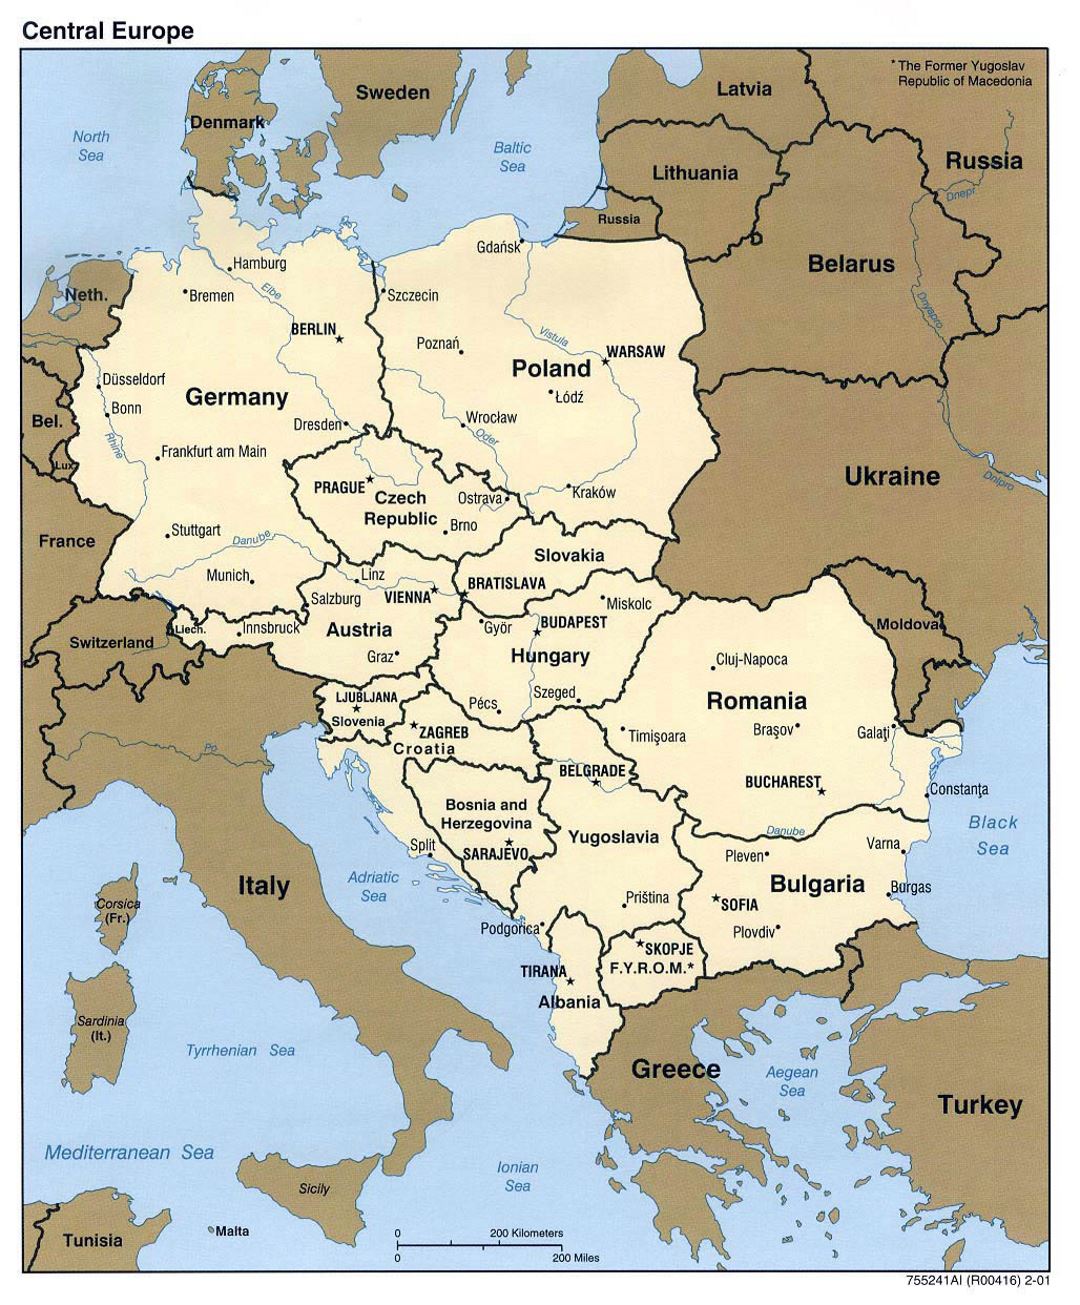 Detailed political map of Central Europe - 2001